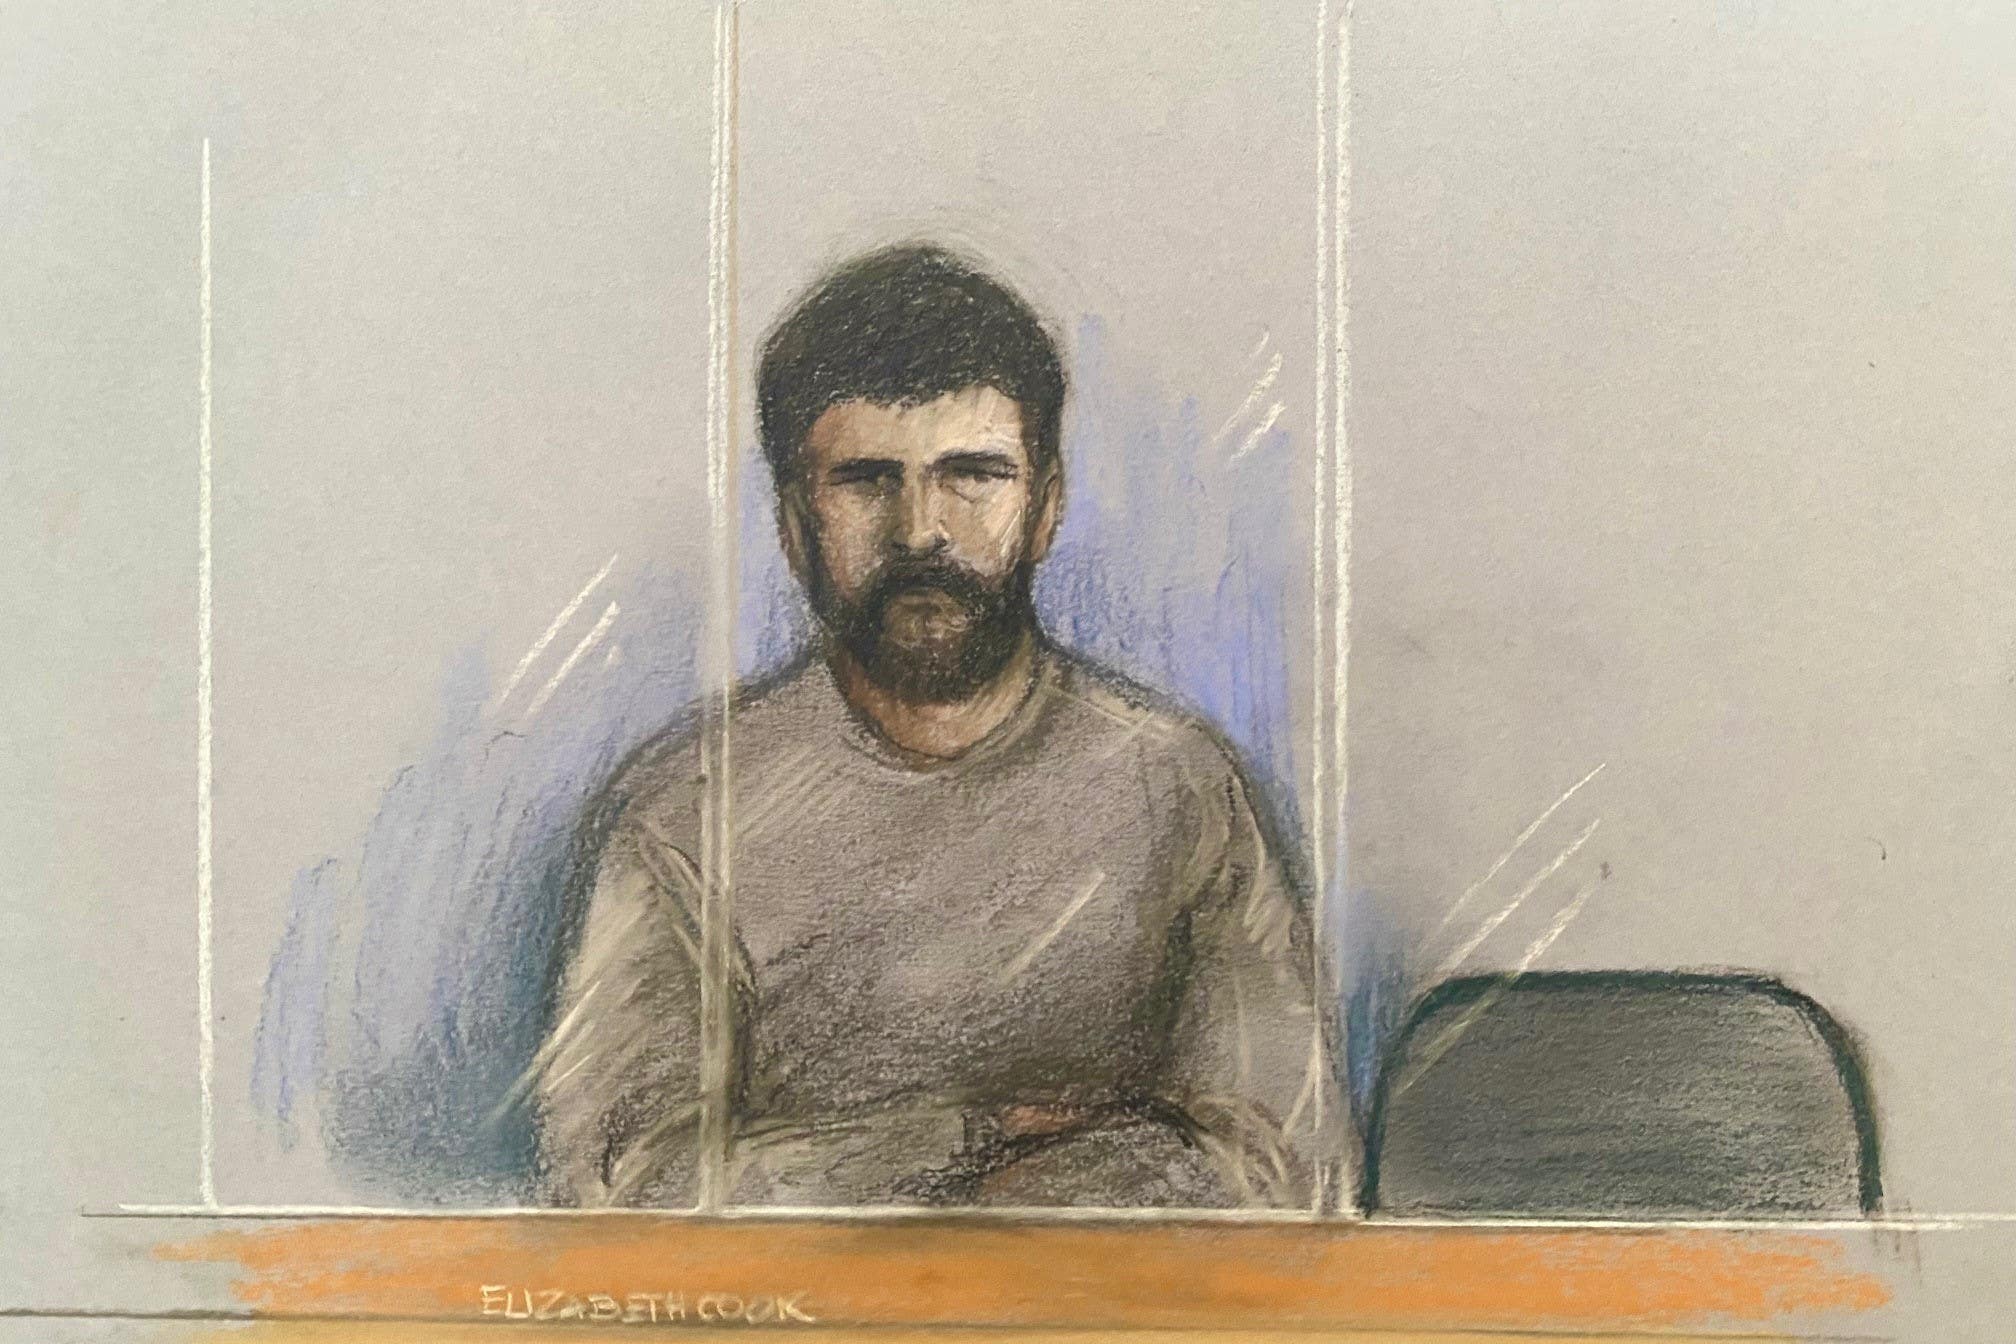 An artist’s impression of Joshua Bowles who is accused of stabbing a woman at a leisure centre in Cheltenham (Elizabeth Cook/PA)